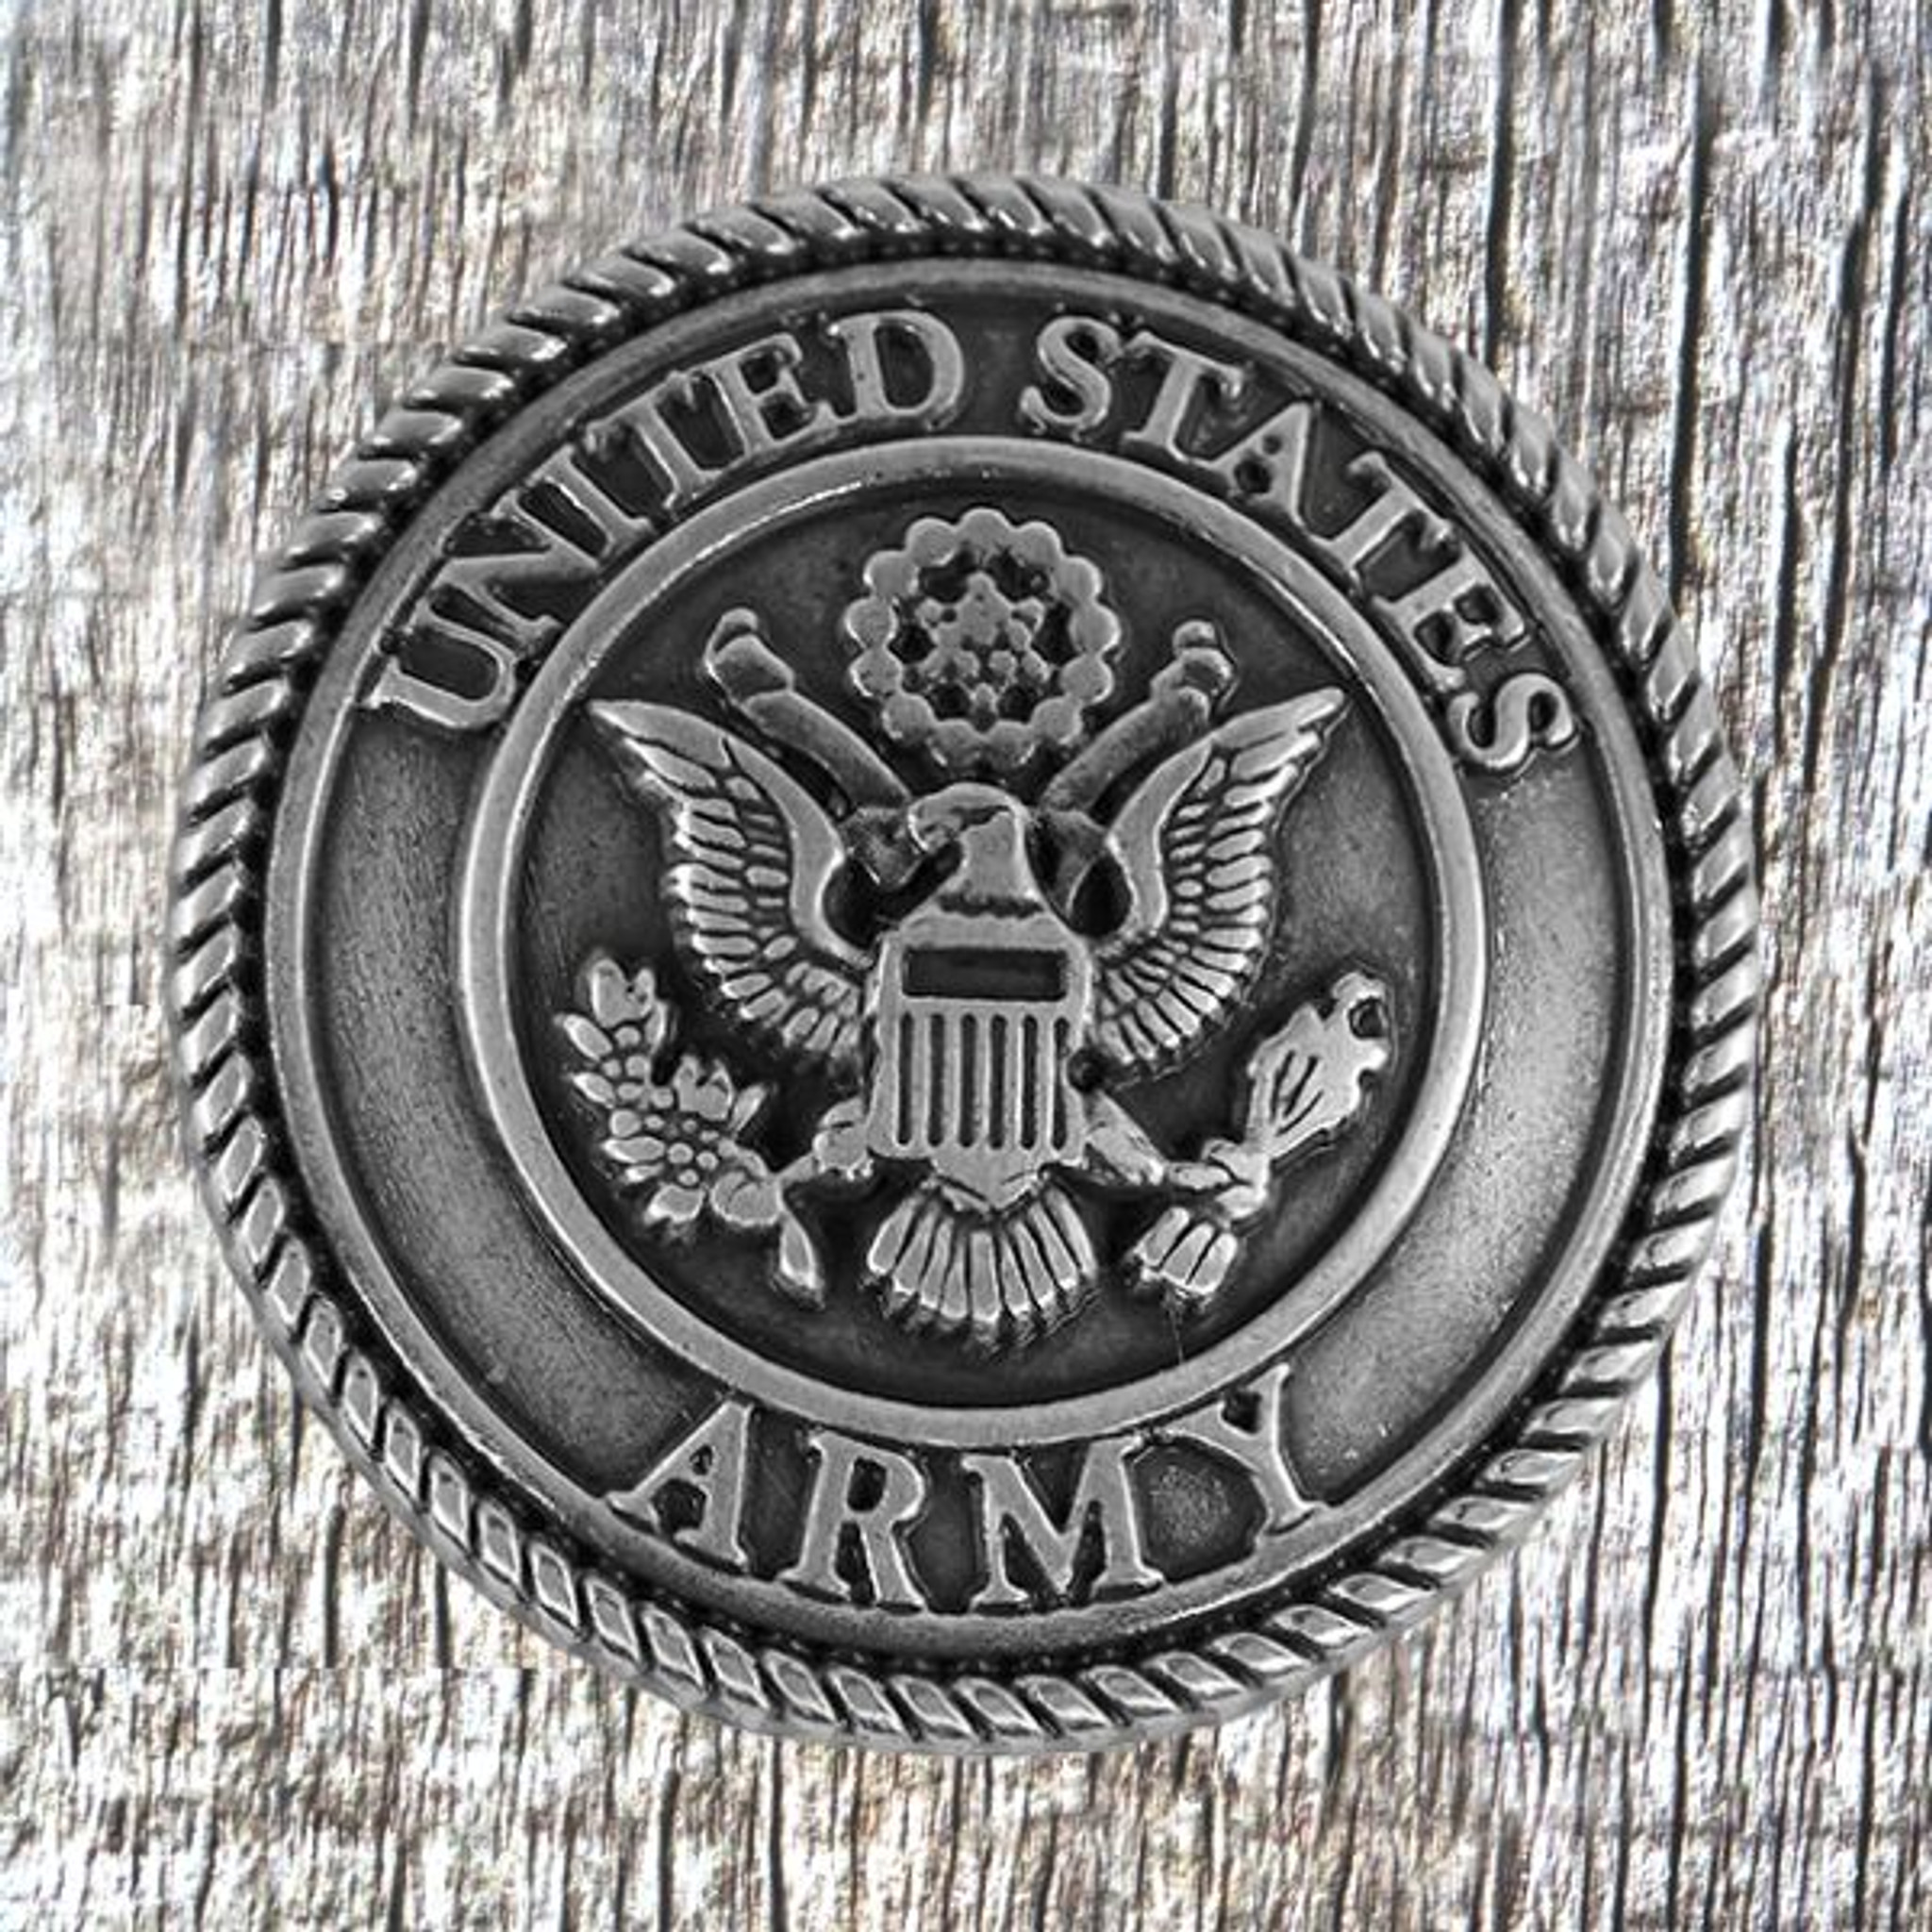 MILITARY 1-1/4 INCH CONCHOS UNITED STATES MARINE CORPS - Texas Uniques Store